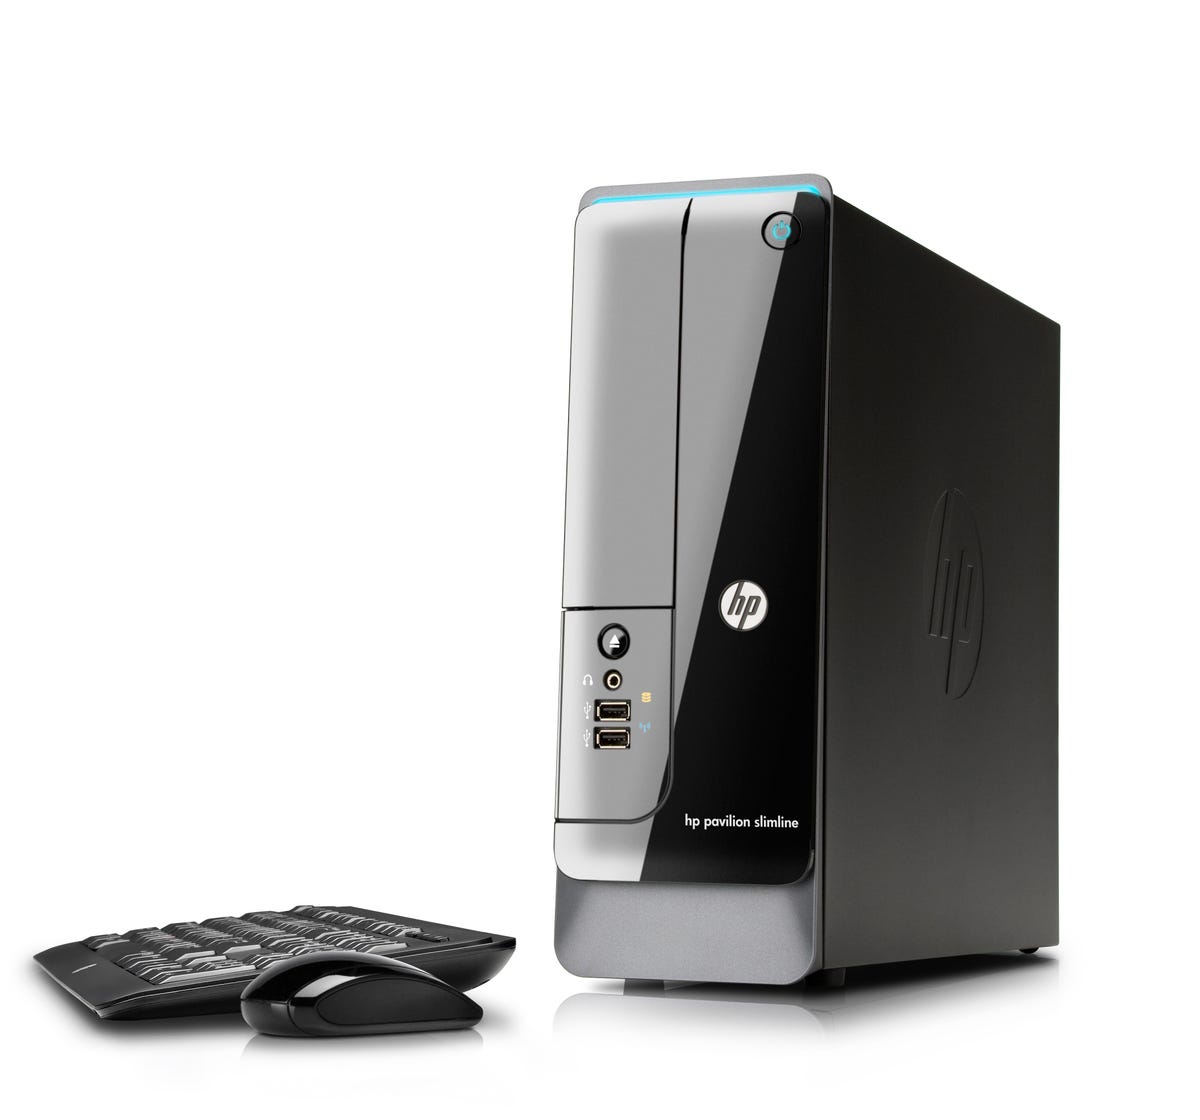 The new HP Slimline s5 design also looks a lot like the previous model.